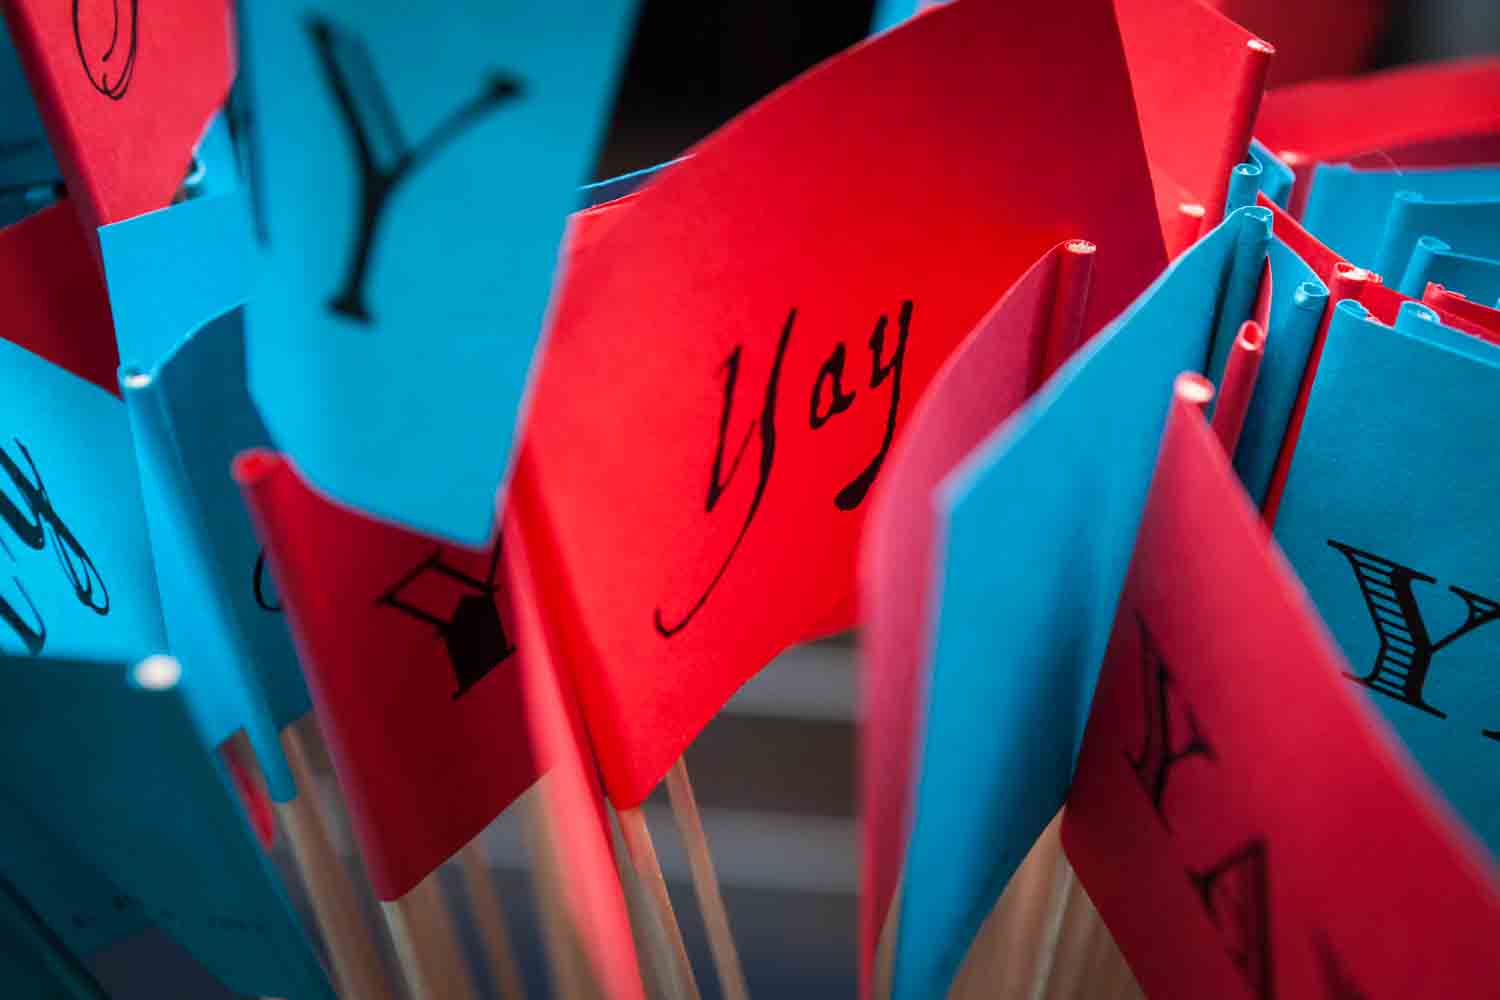 Close up on red and blue flags with the word 'Yay!'